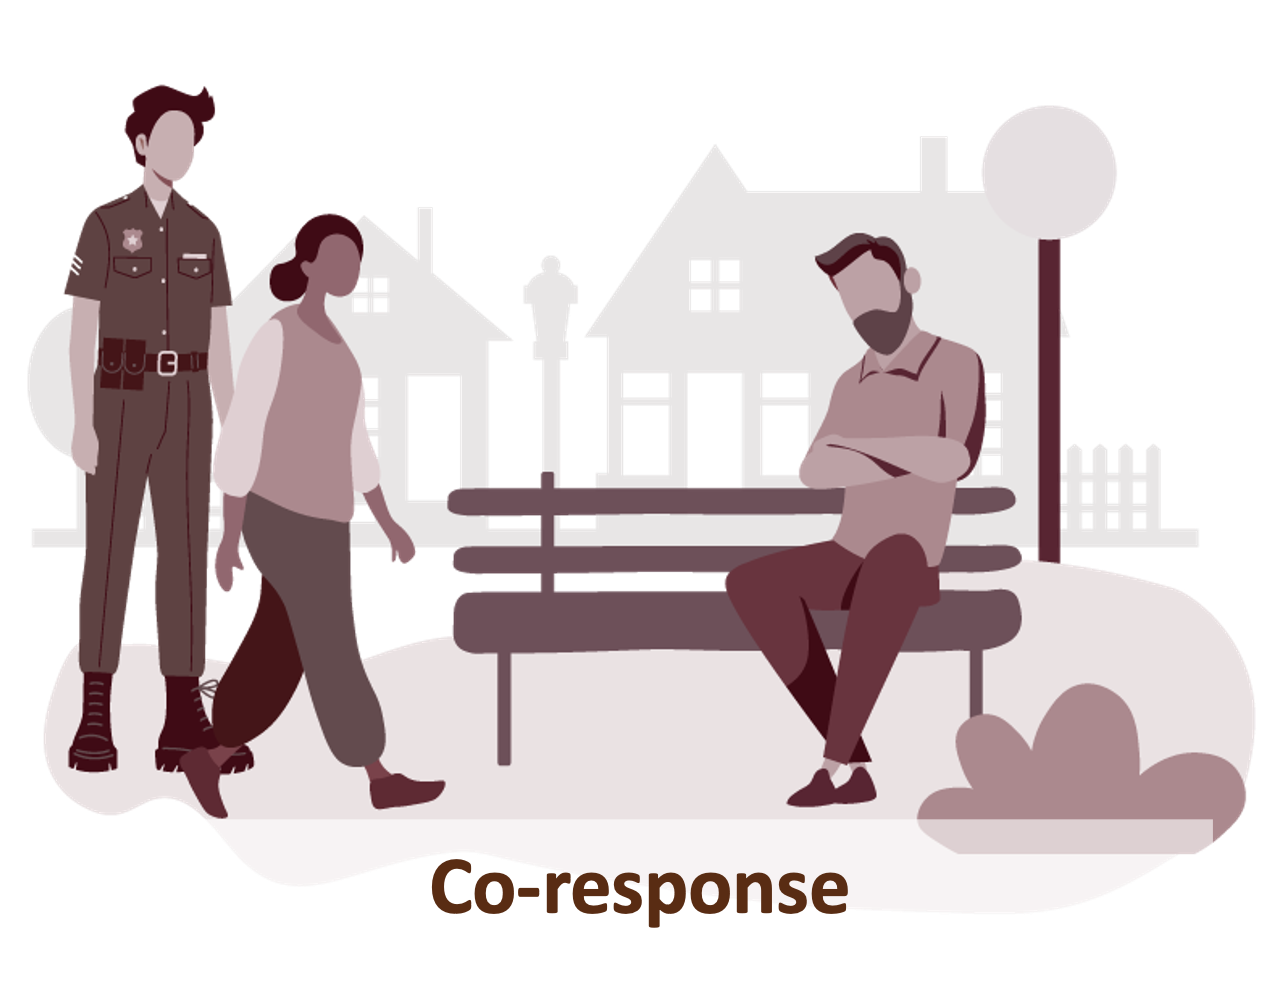  illustration showing clinician and law enforcement responding to someone in crisis in the community